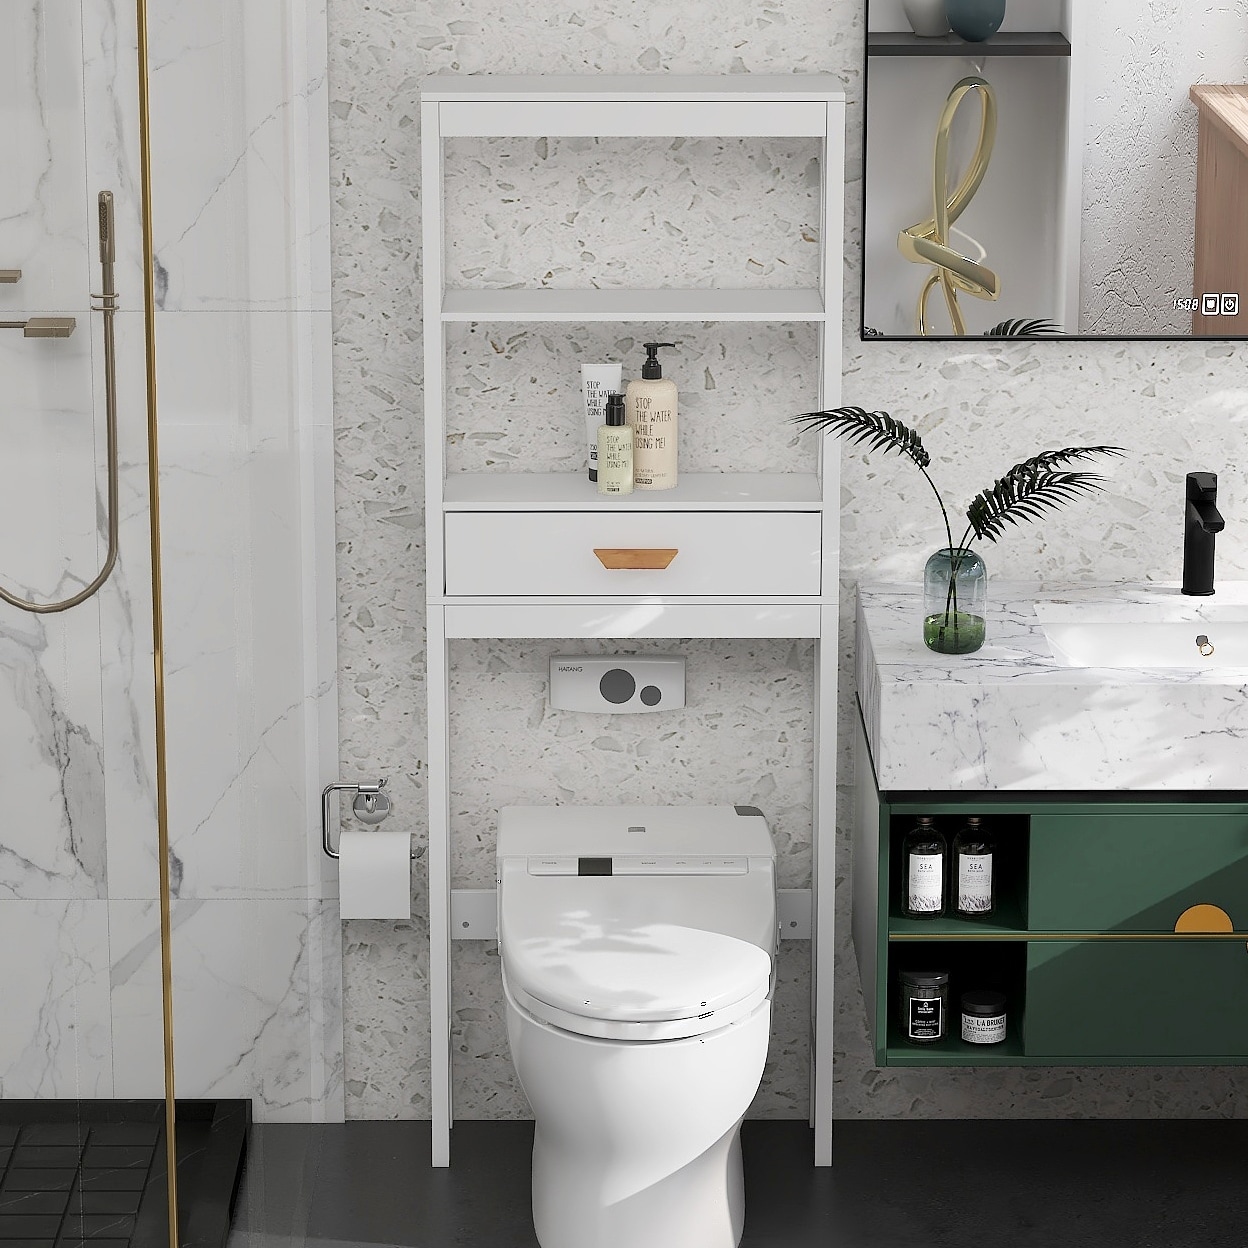 https://ak1.ostkcdn.com/images/products/is/images/direct/6afd657025a3a8d257416217b53faa0ceae7ba42/Over-the-Toilet-Storage-Cabinet-White-with-one-Drawer-and-2-Shelves-Space-Saver-Bathroom-Rack.jpg